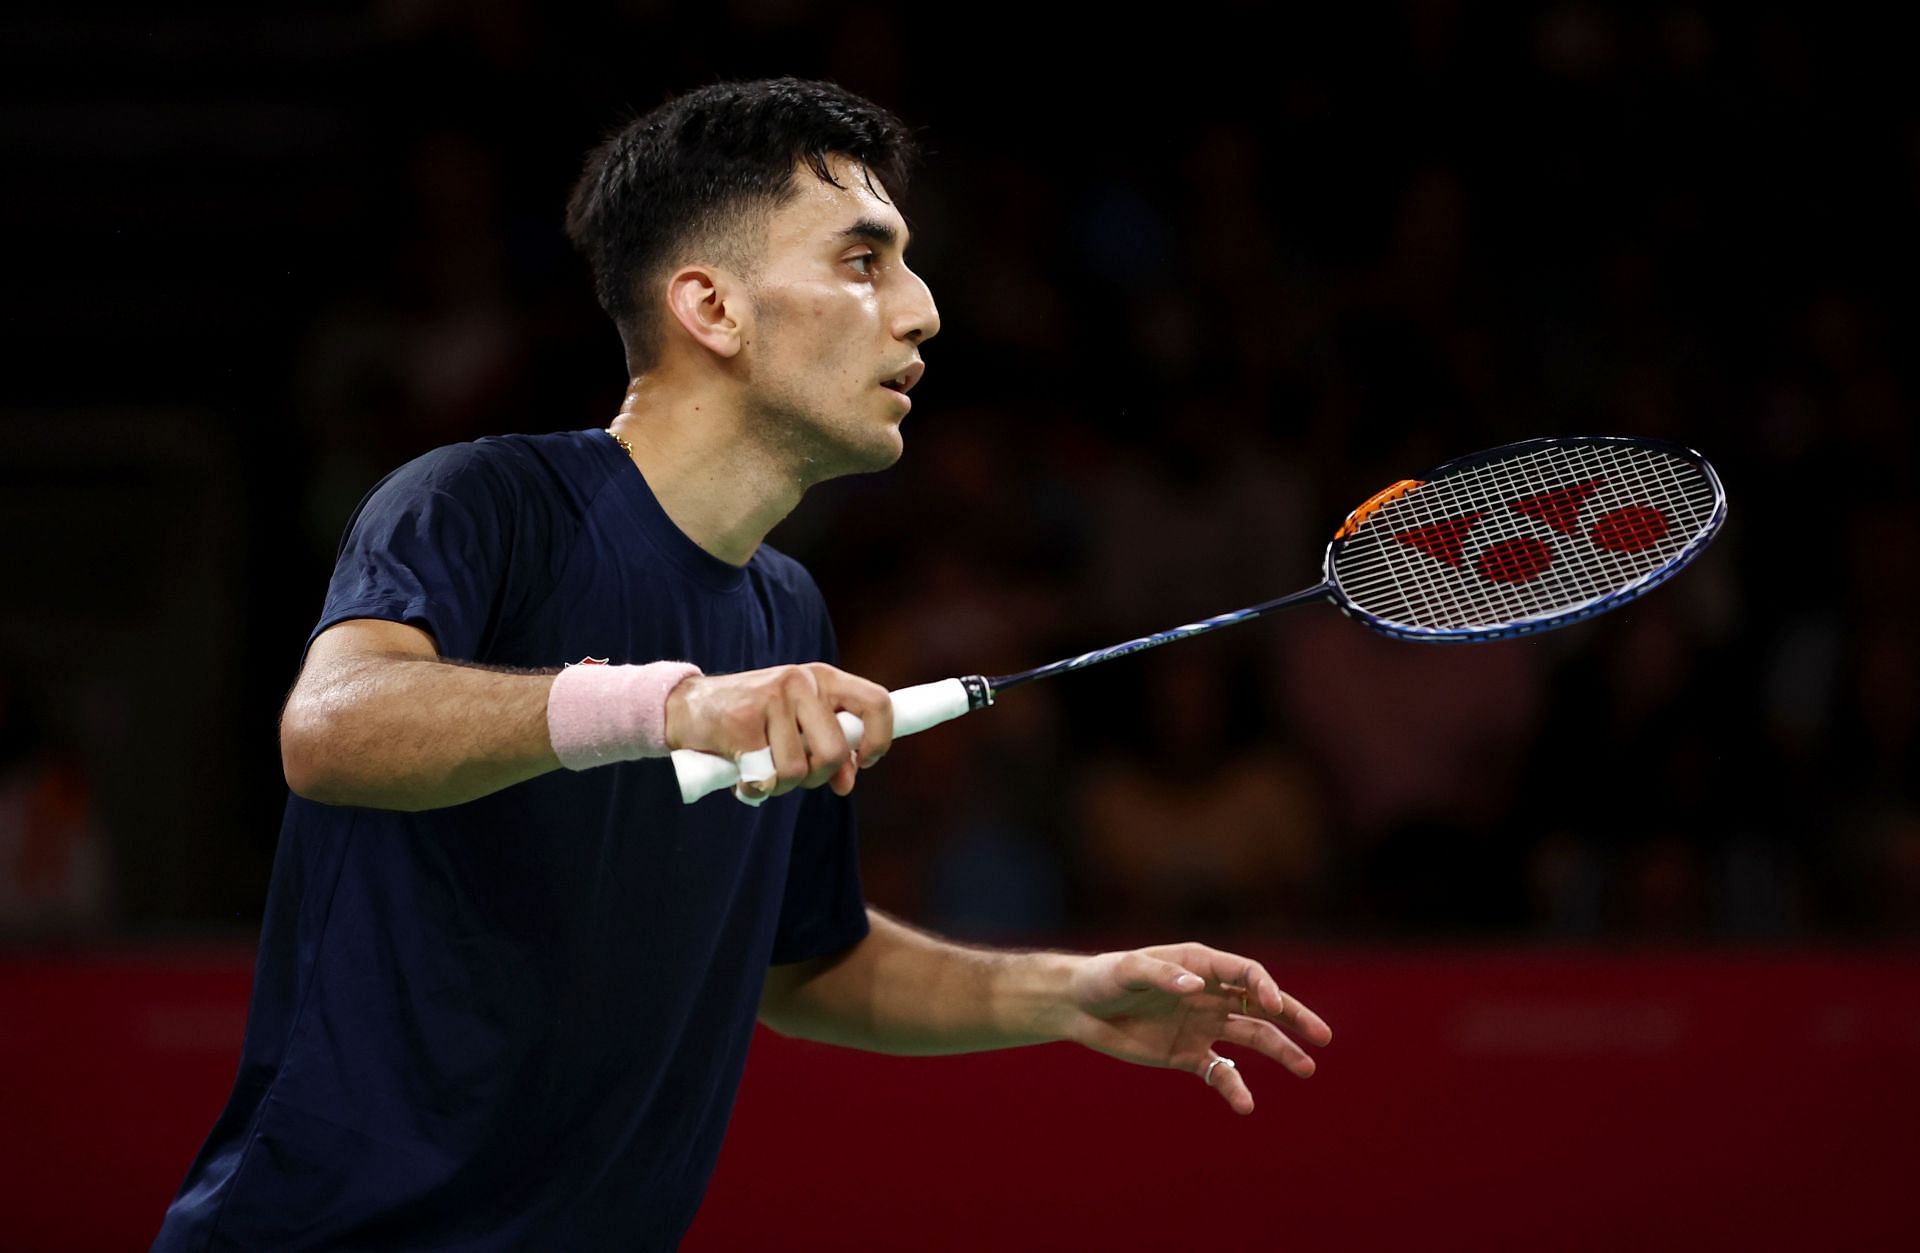 Indonesia Masters 2023 Lakshya Sen vs Jonatan Christie preview, head-to-head, prediction, where to watch and live streaming details